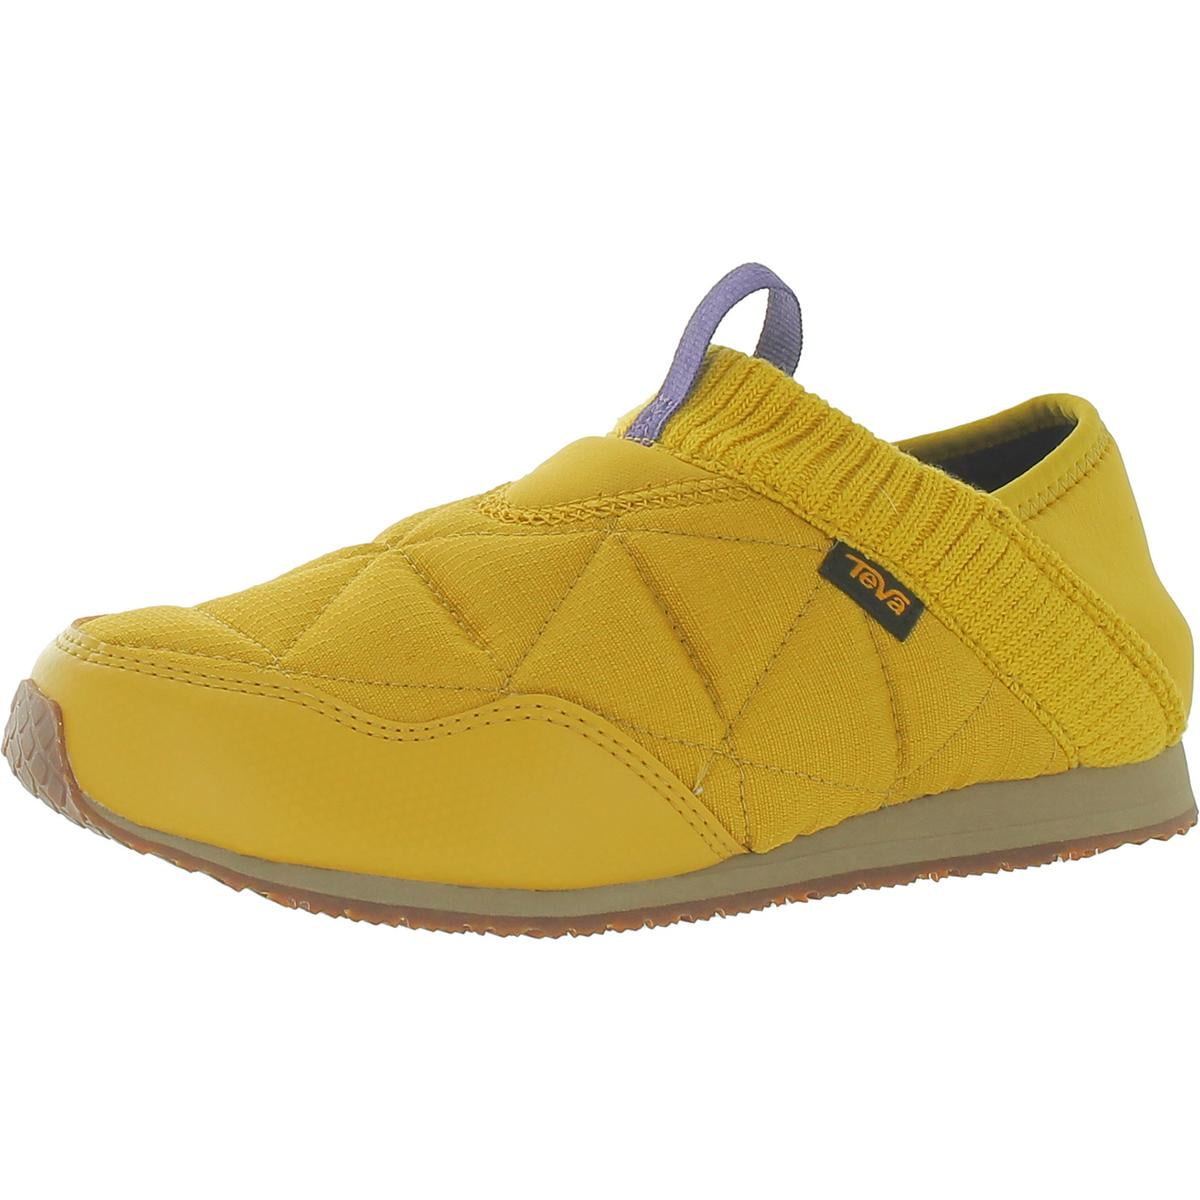 Teva Womens Re Ember Moc Quilted Casual Slip-On Sneakers - Walmart.com